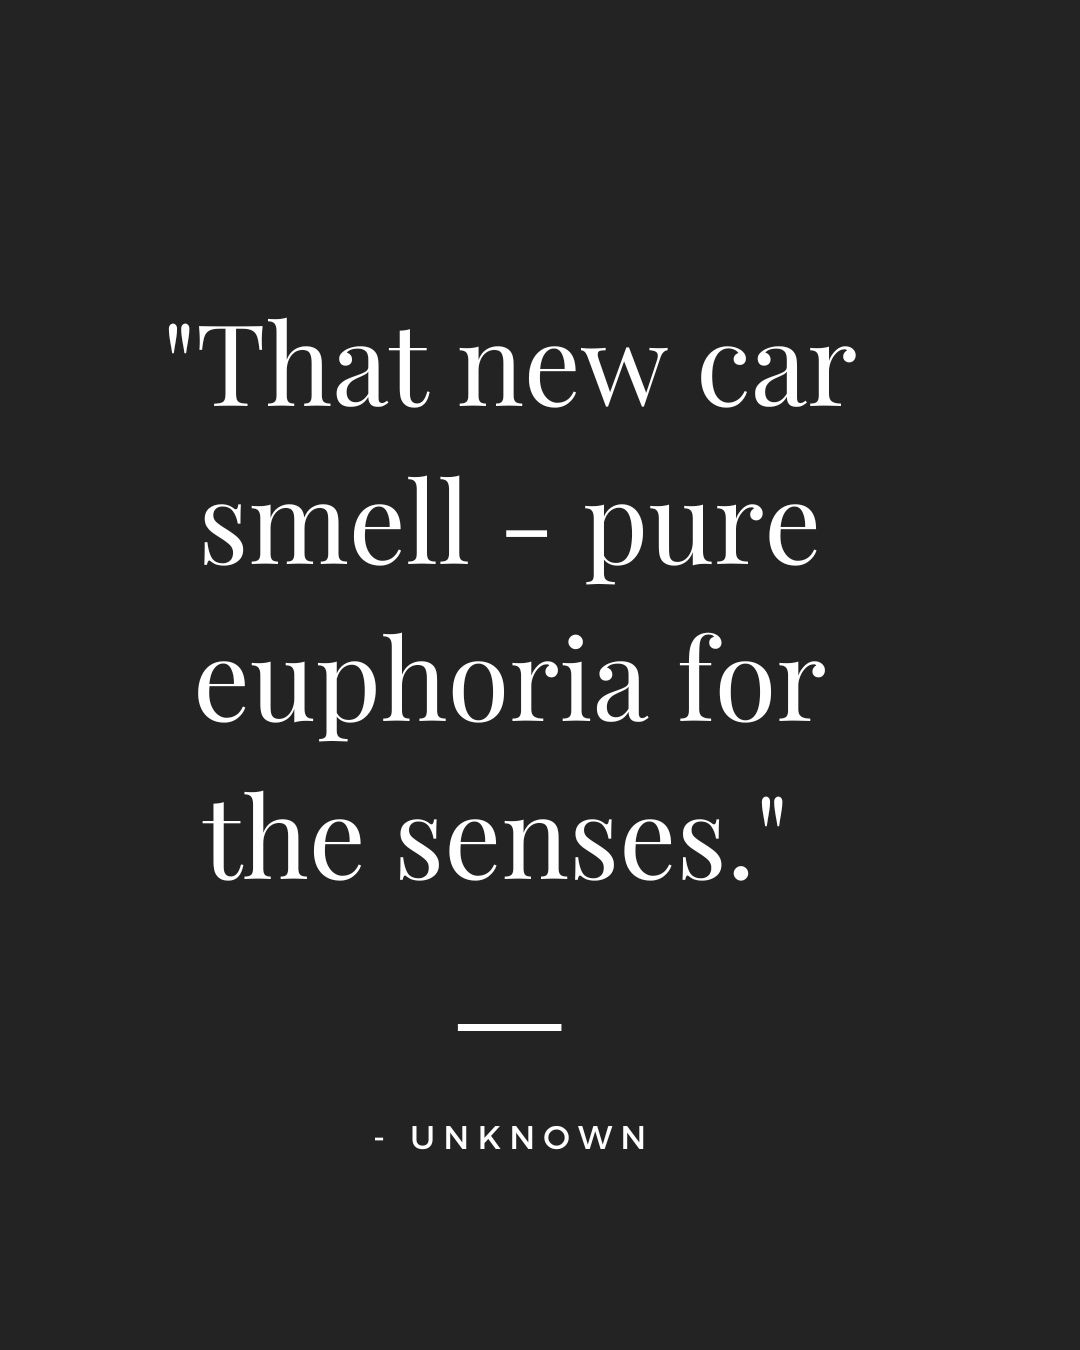 New Car Quotes